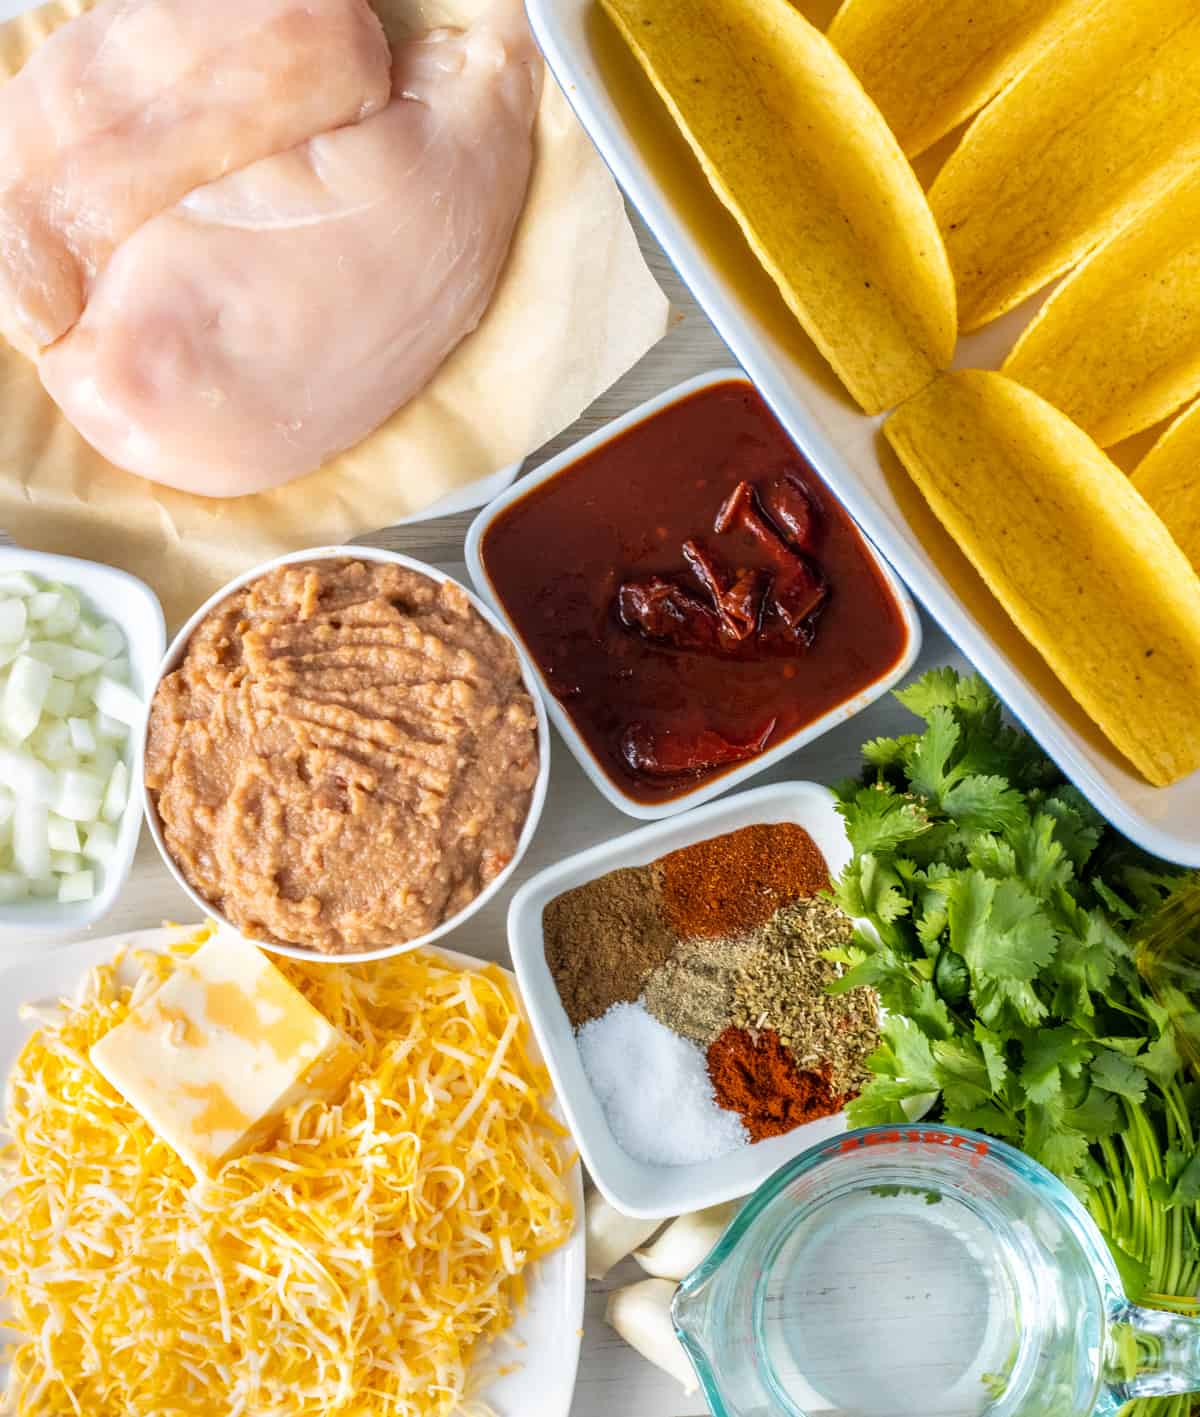 Ingredients for baked chicken tacos.